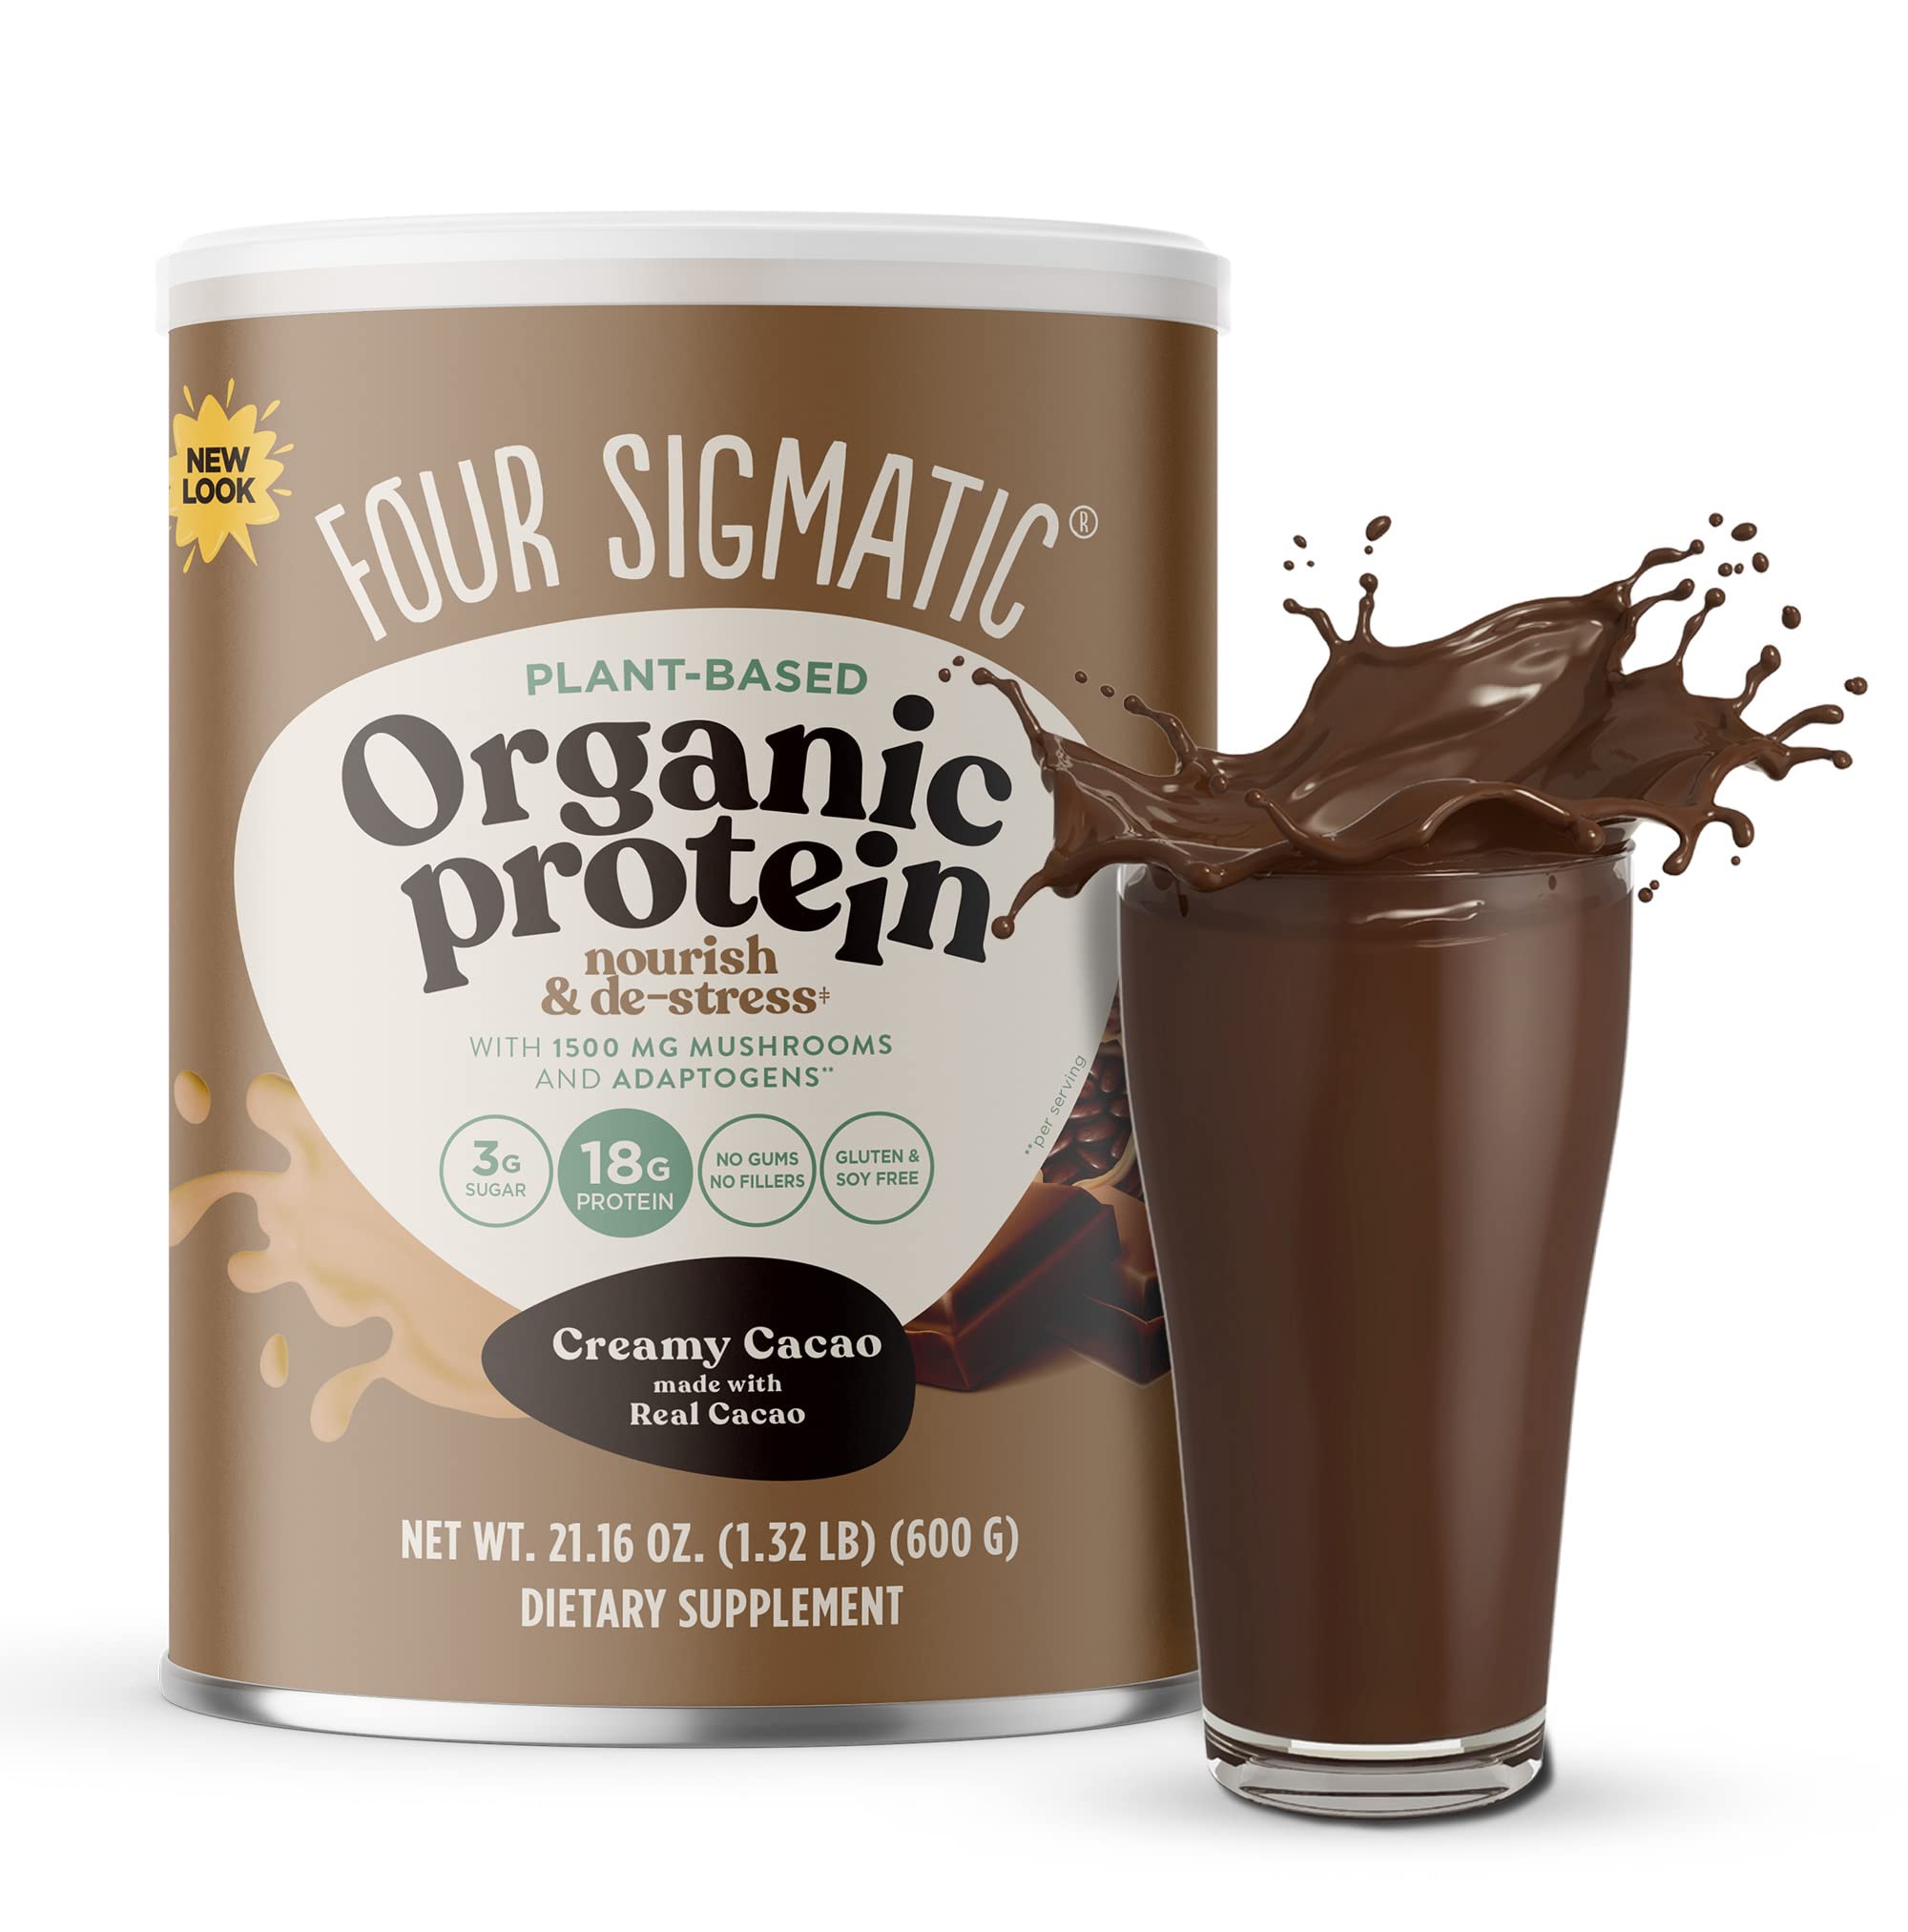 21.16-Oz Four Sigmatic Organic Plant-Based Protein Powder for Brain Function & Immune Support (Creamy Cacao) $21.41 w/ S&S + Free Shipping w/ Prime or on $25+